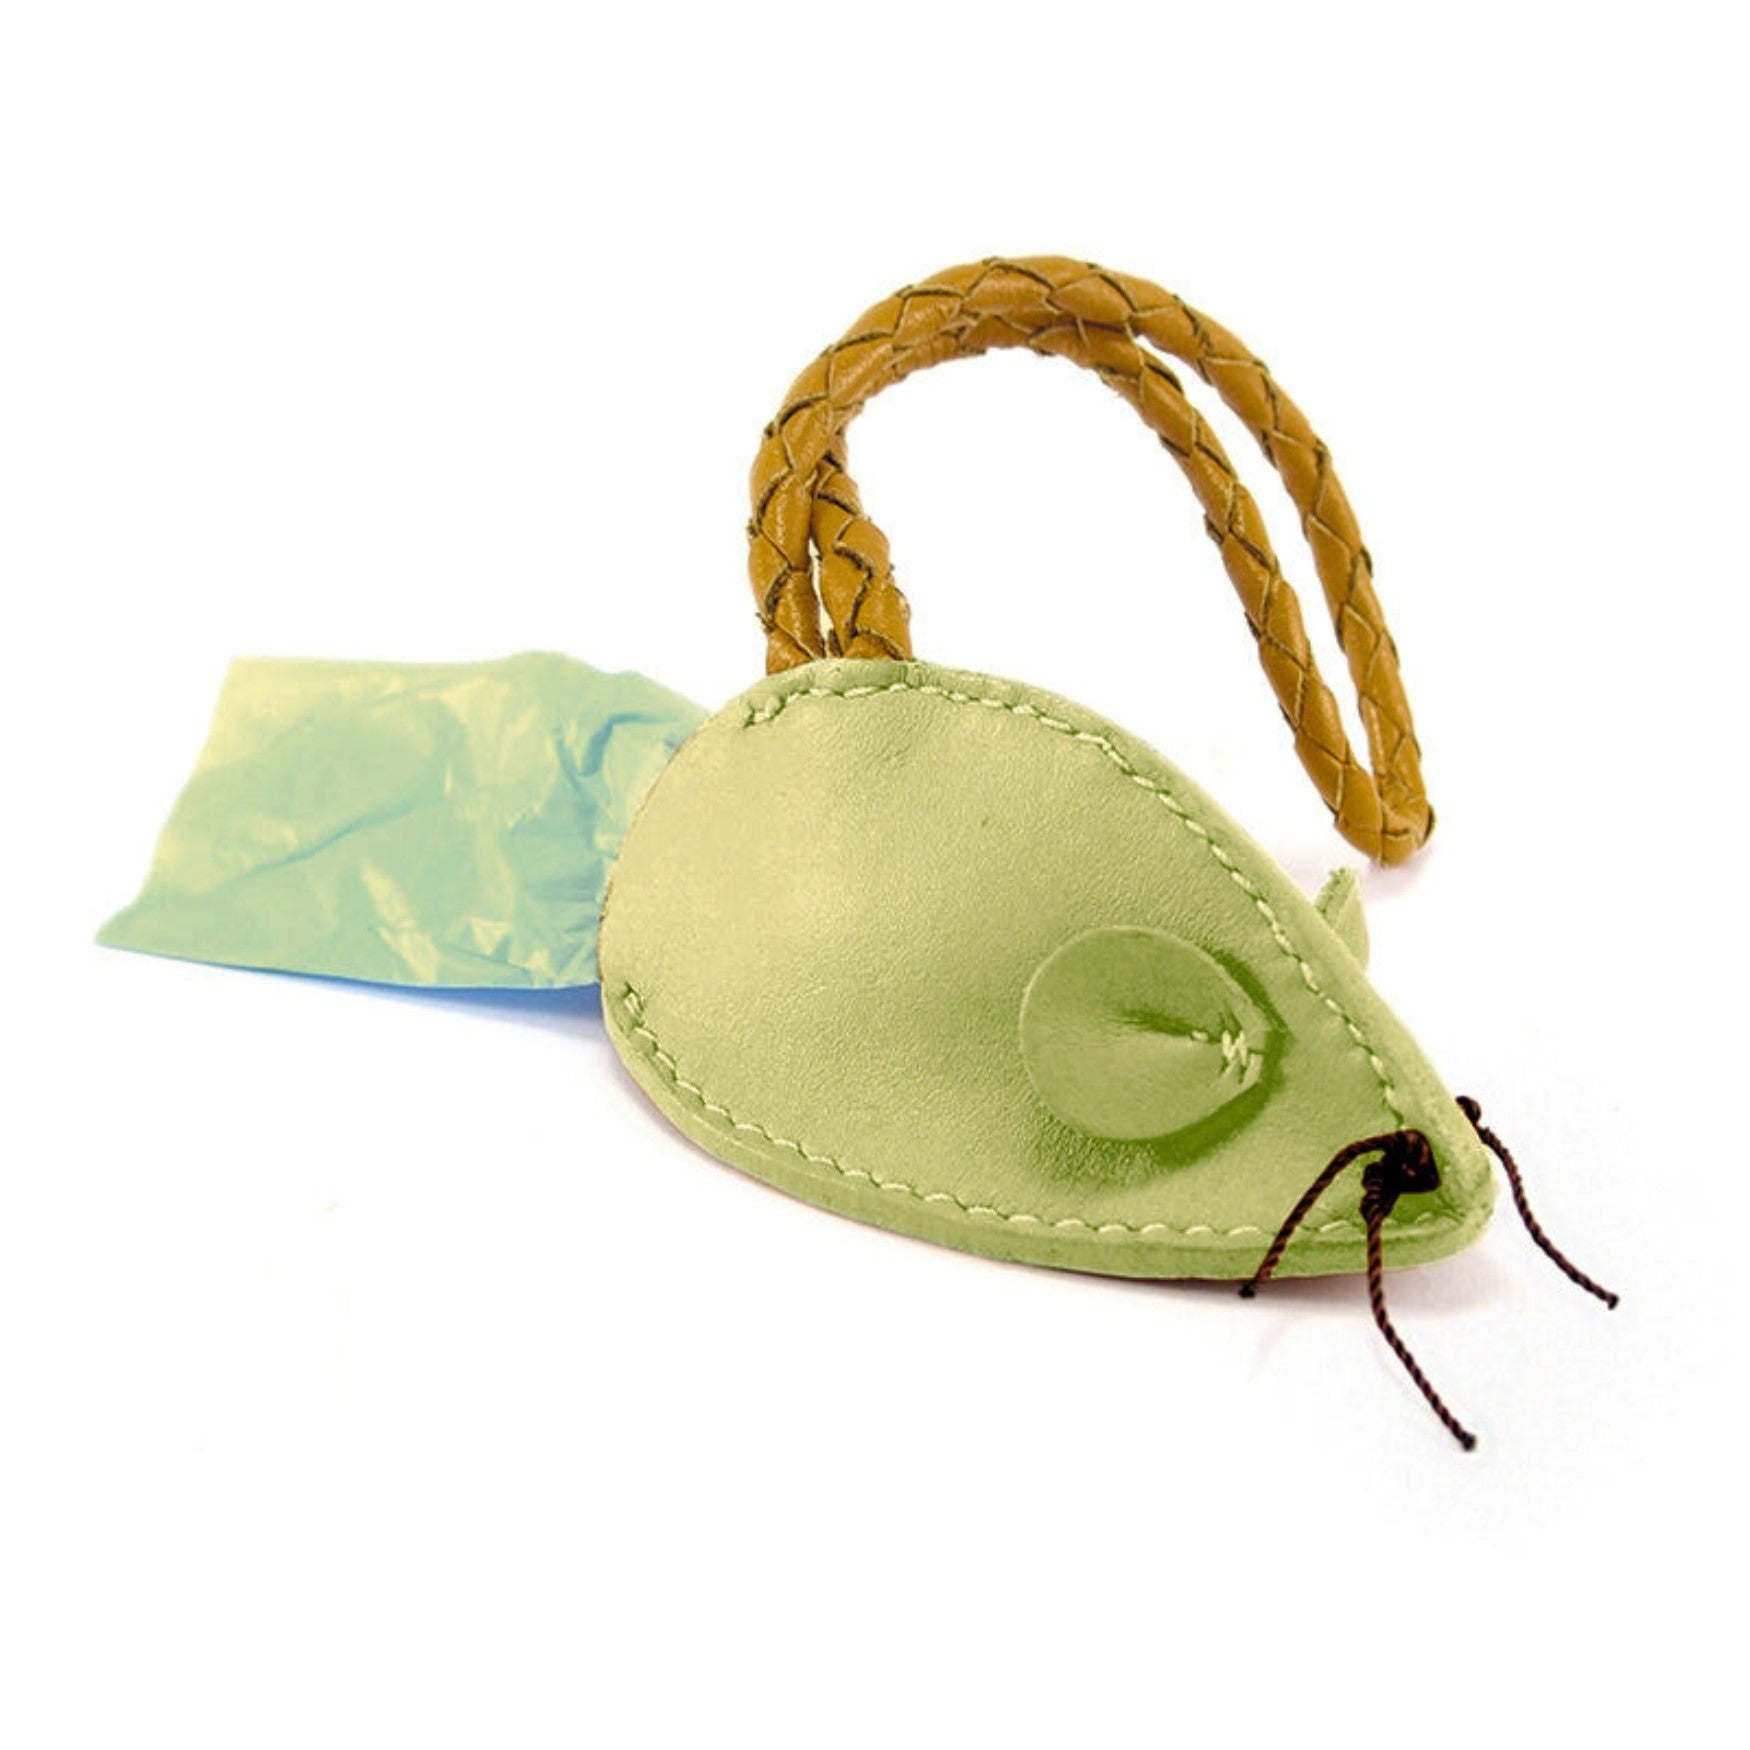 A handmade light green buffalo leather Mouse Poobag Dispenser - pear with a braided tail and stitched details, accompanied by a small blue fabric leaf, isolated on a white background.